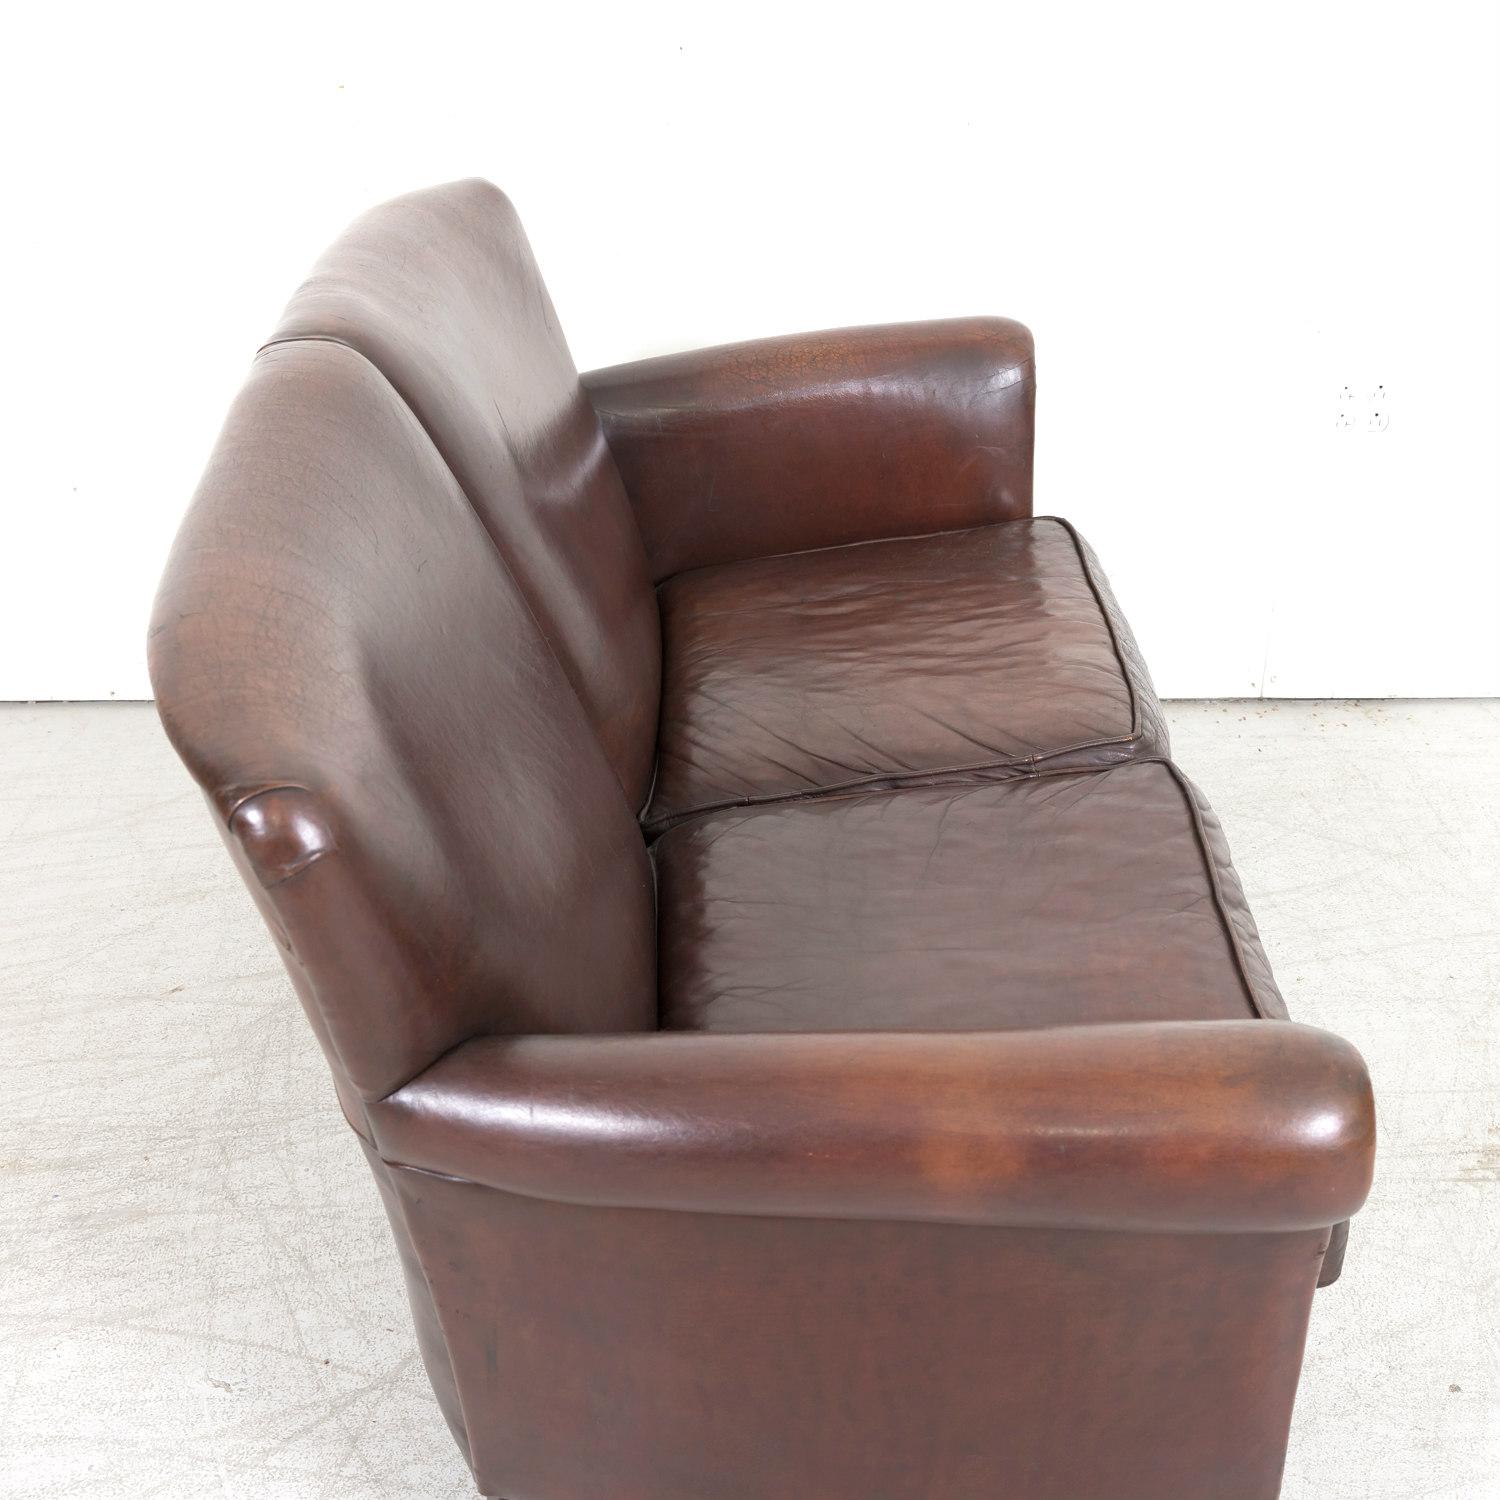 20th Century French Art Deco Settee or Sofa in Original Dark Brown Leather For Sale 10